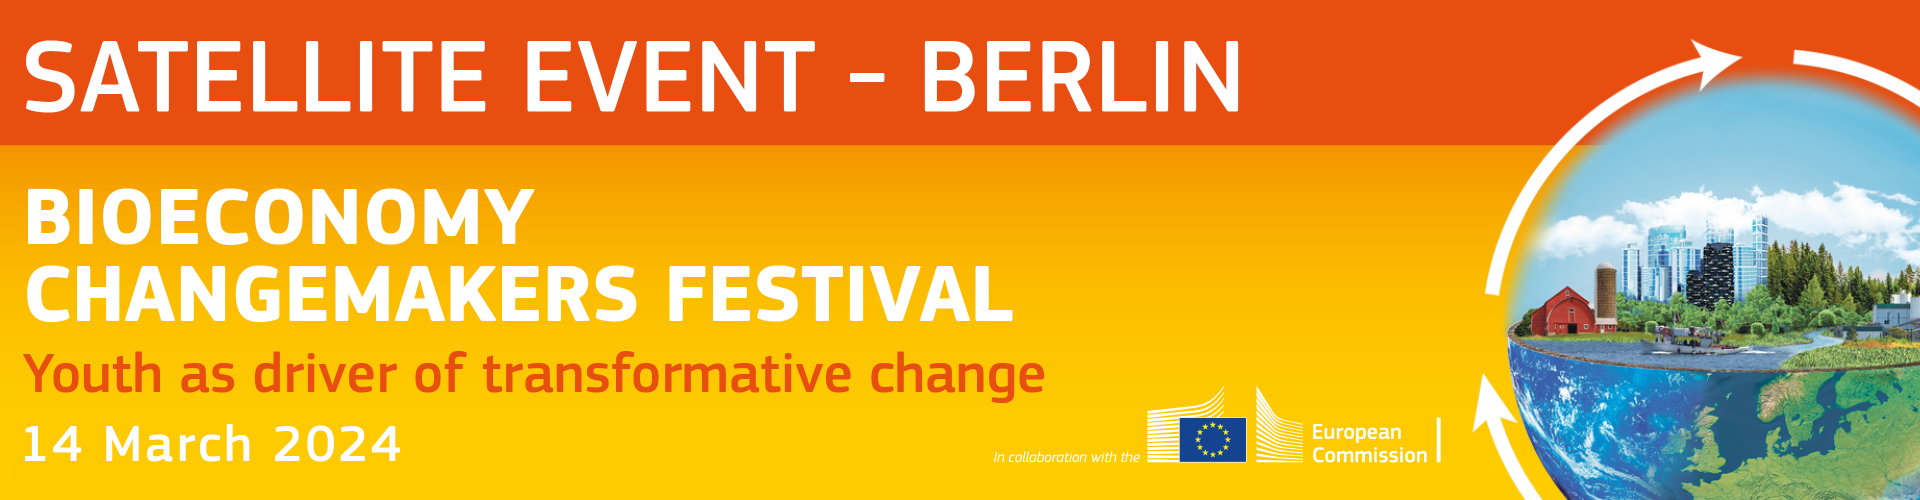 Satellite Event in Berlin. Bioeconomy Changemakers festival. Youth as driver of transformative change. 14th march 2024.